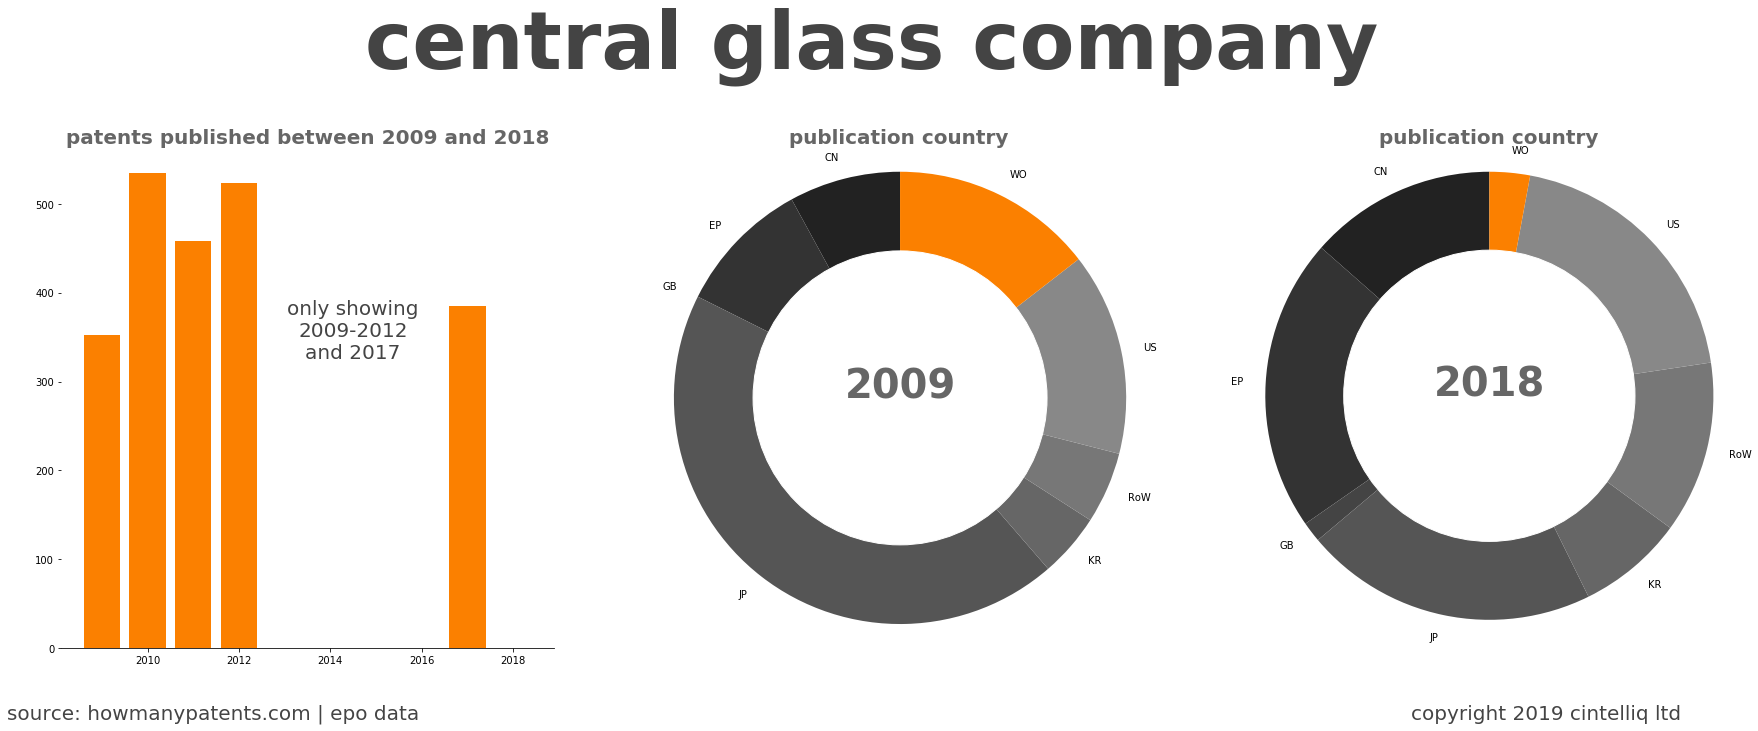 summary of patents for Central Glass Company